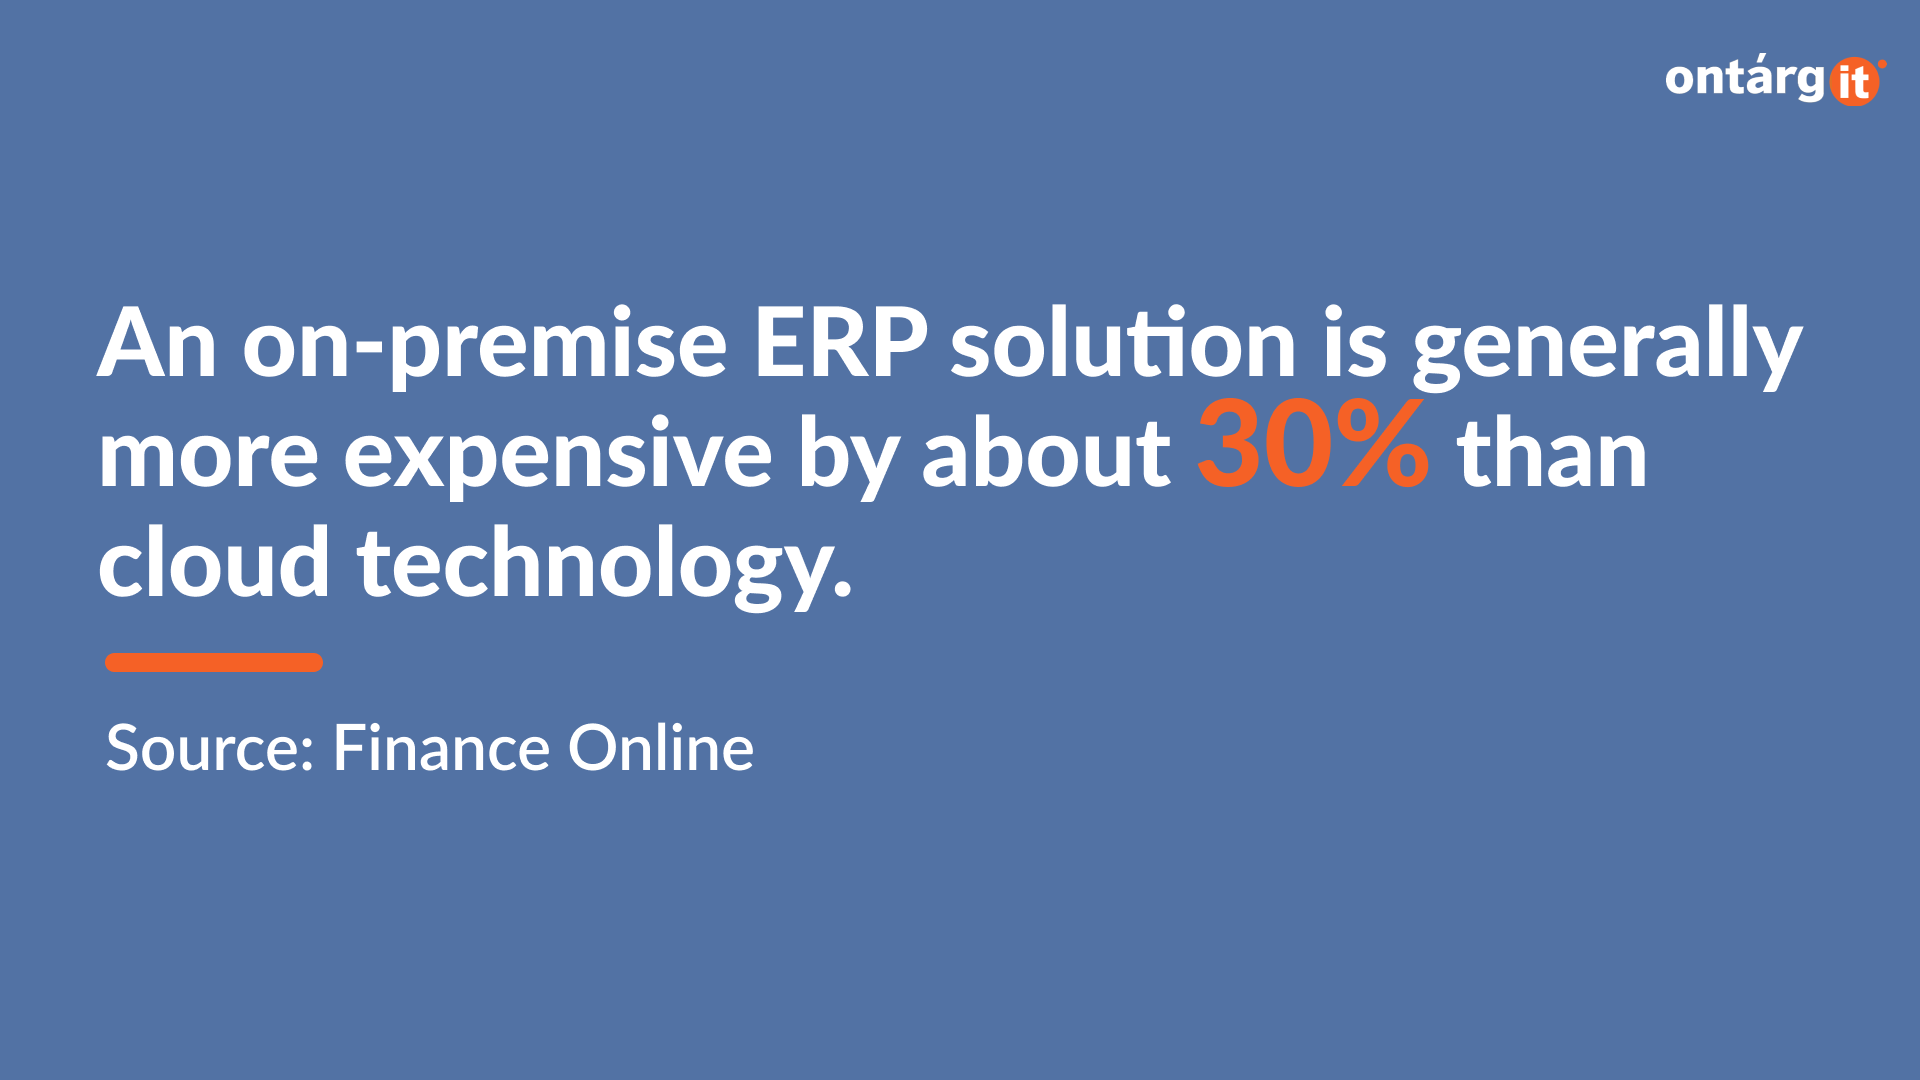 An on-premise ERP solution is generally more expensive by about 30% than cloud technology.